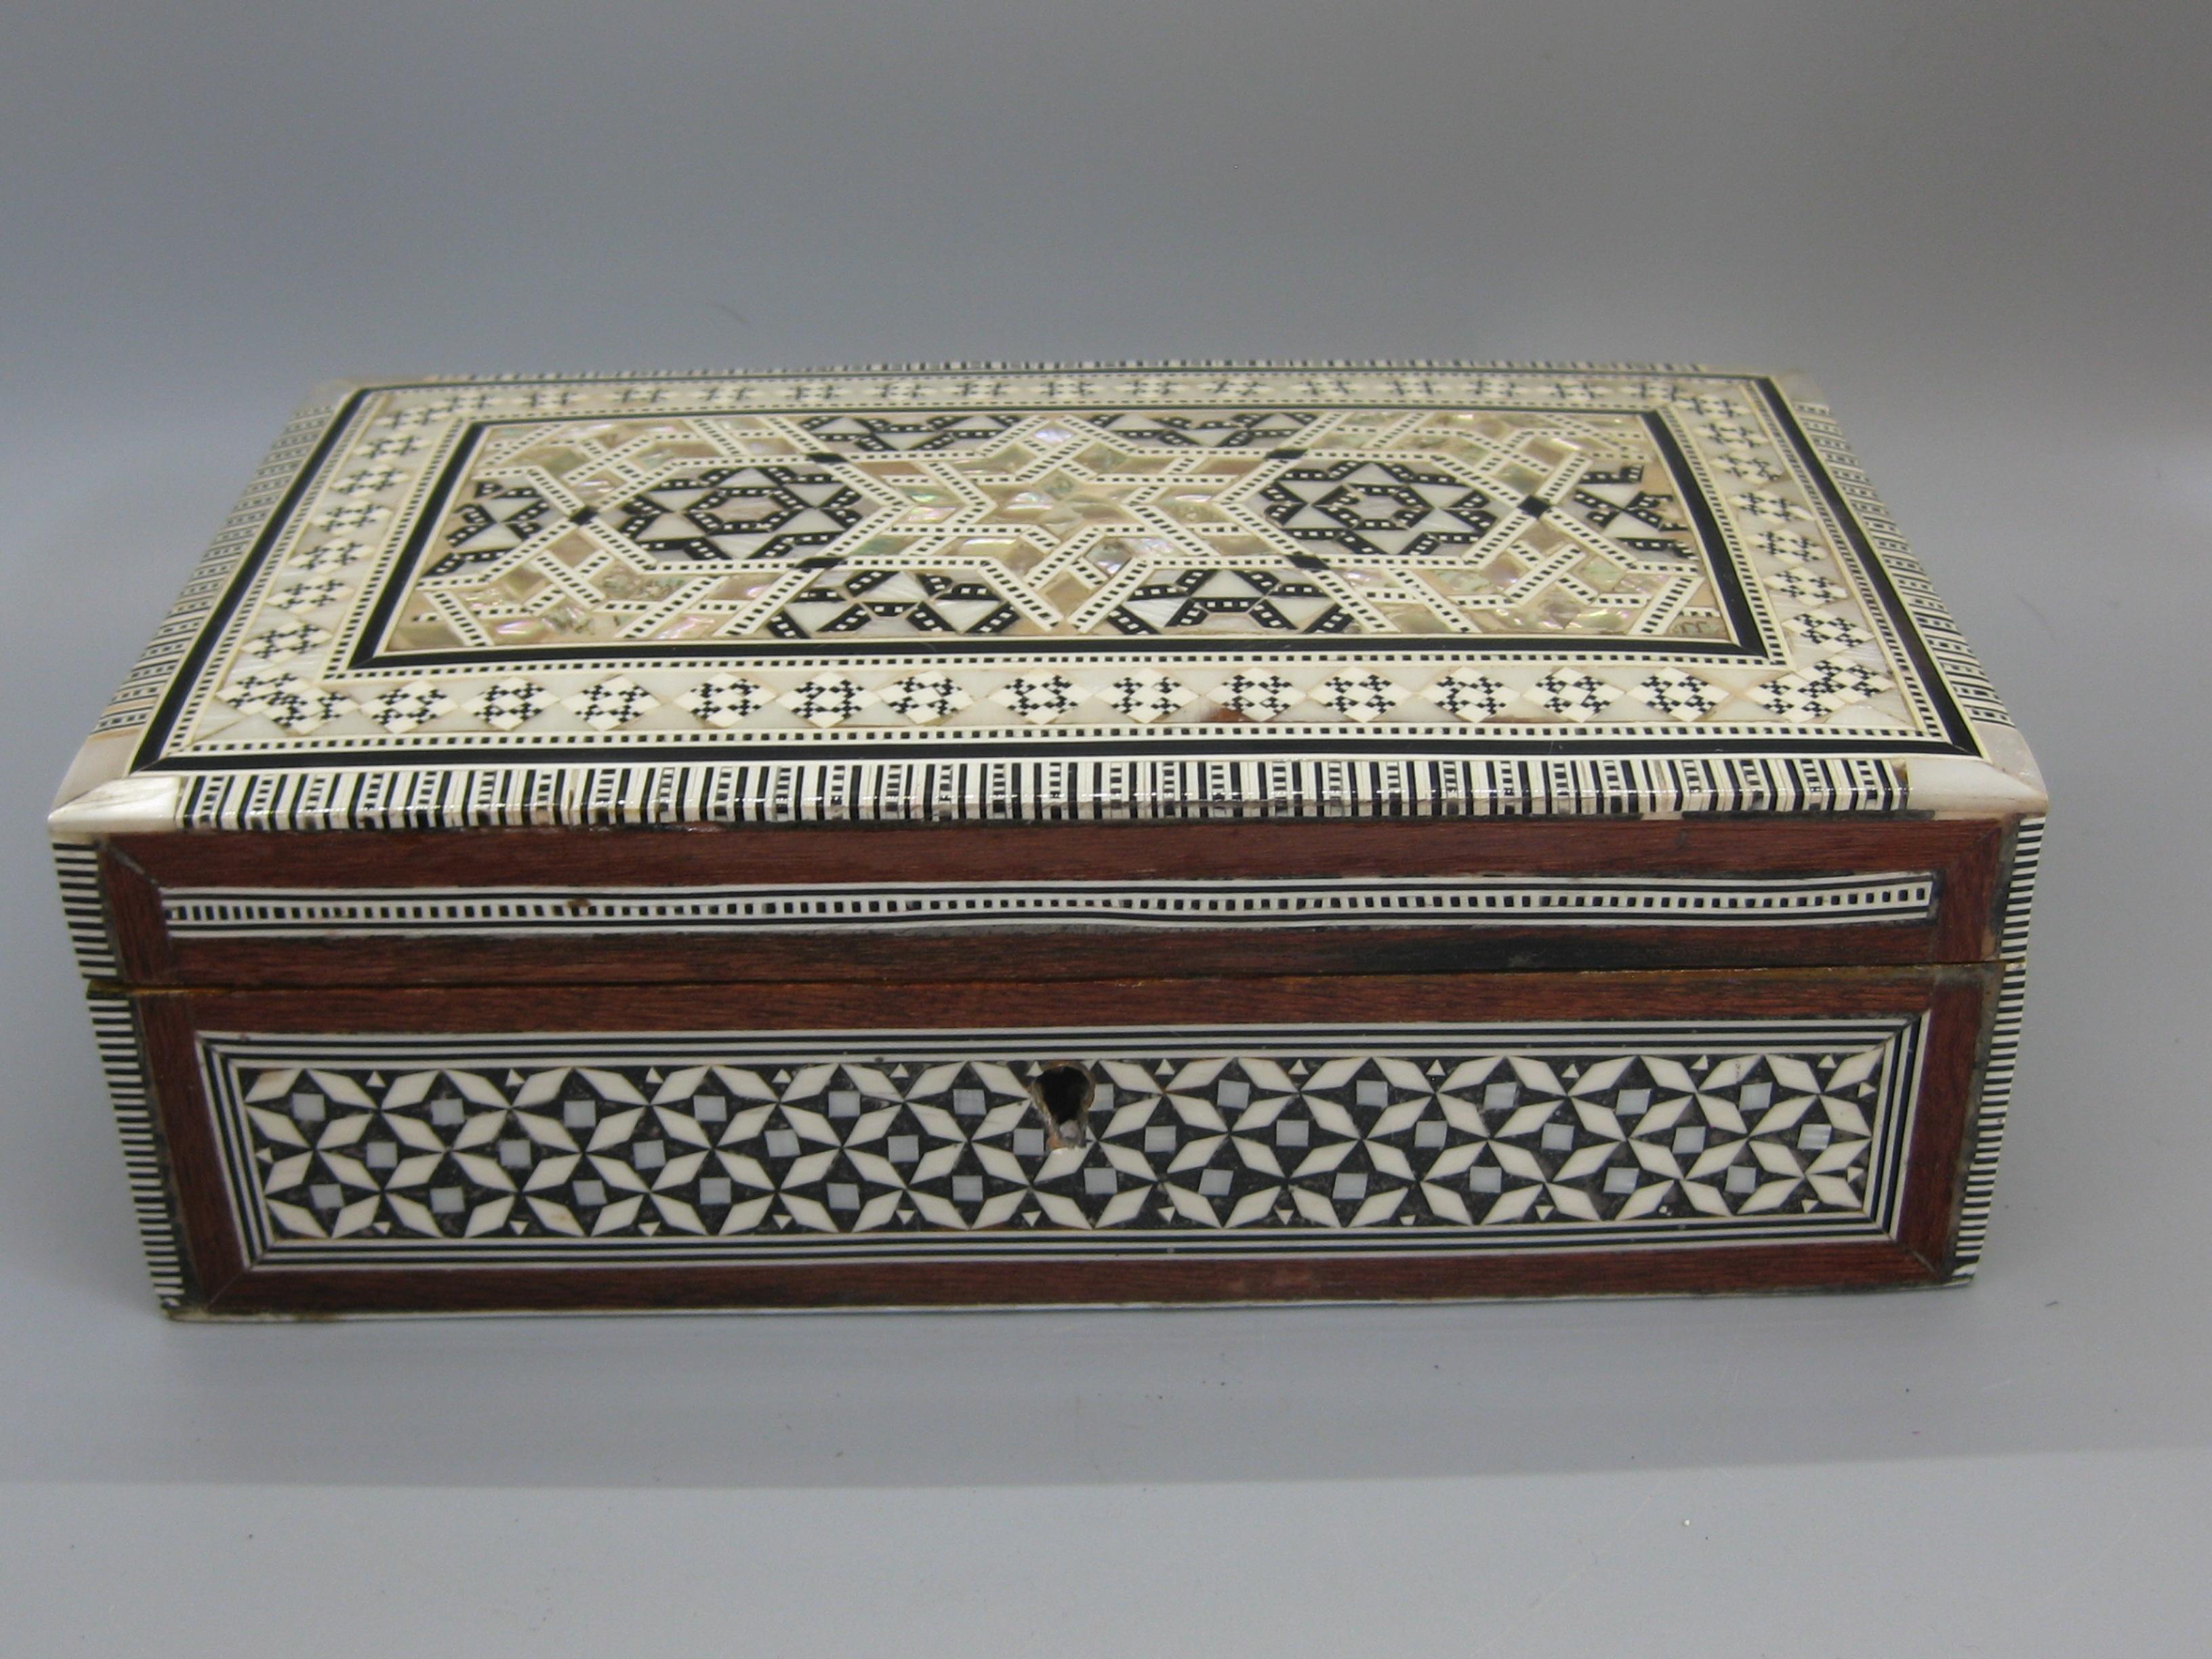 Beautiful highly detailed handcrafted micro mosaic marquetry wooden trinket/jewelry box. Pieces are made of mother of pearl and bone. High quality wood work and made very well. Inside is lined with red velvet. Measures approx. 7 3/4